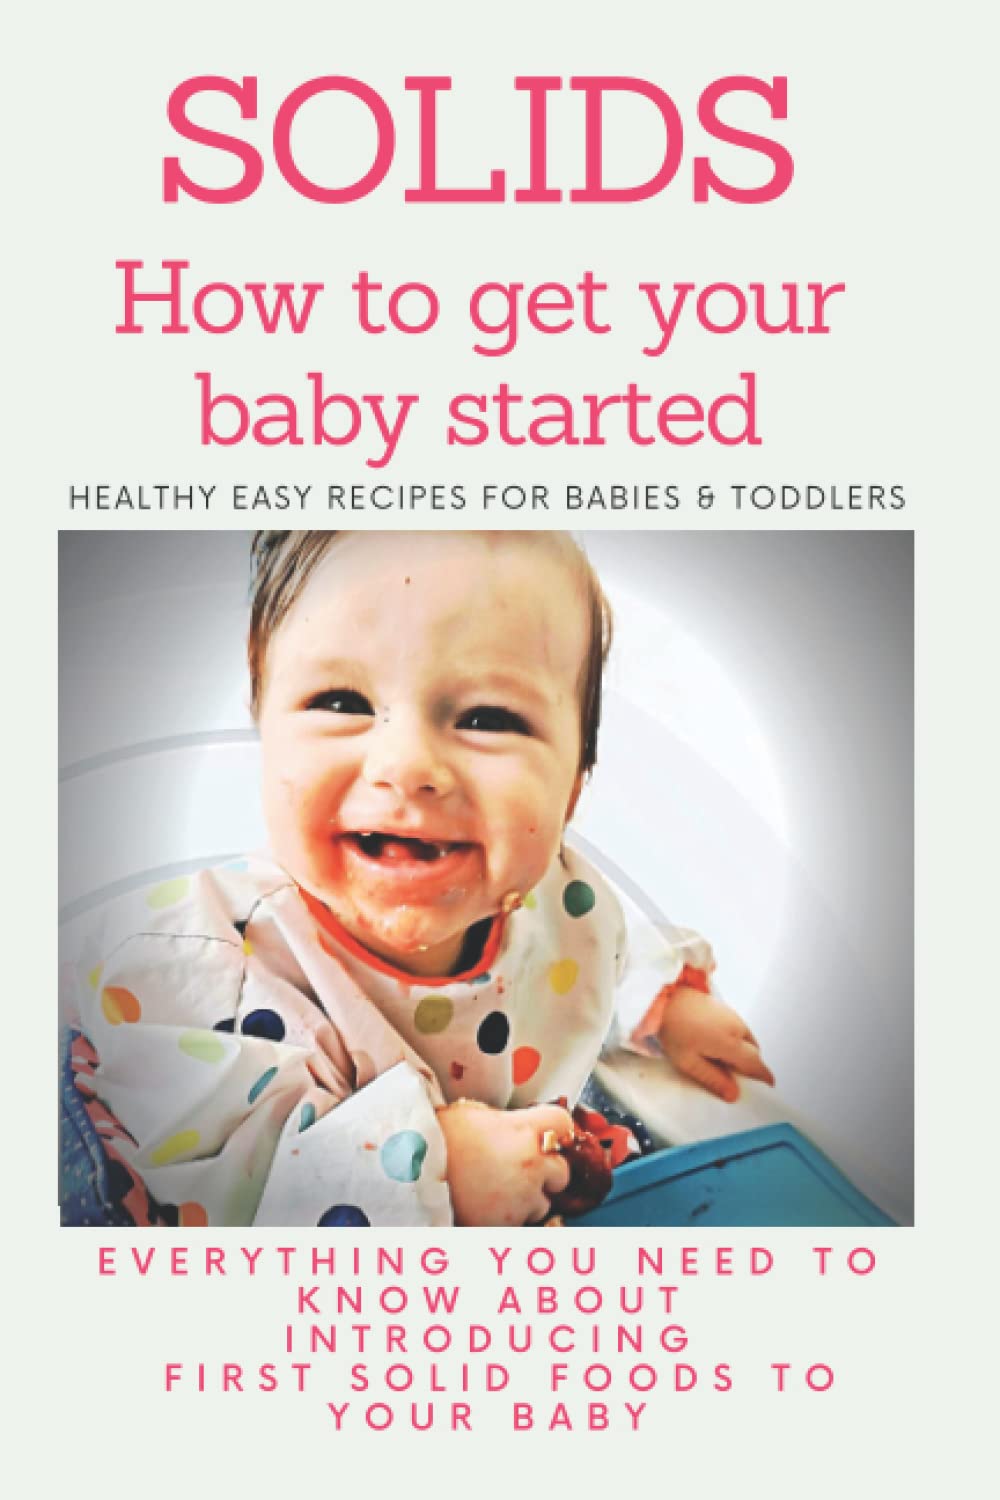 Solids: How to Get Your Baby Started: Everything you need to know about introducing first solid foods to your baby: Healthy Easy Recipes for babies & toddlers